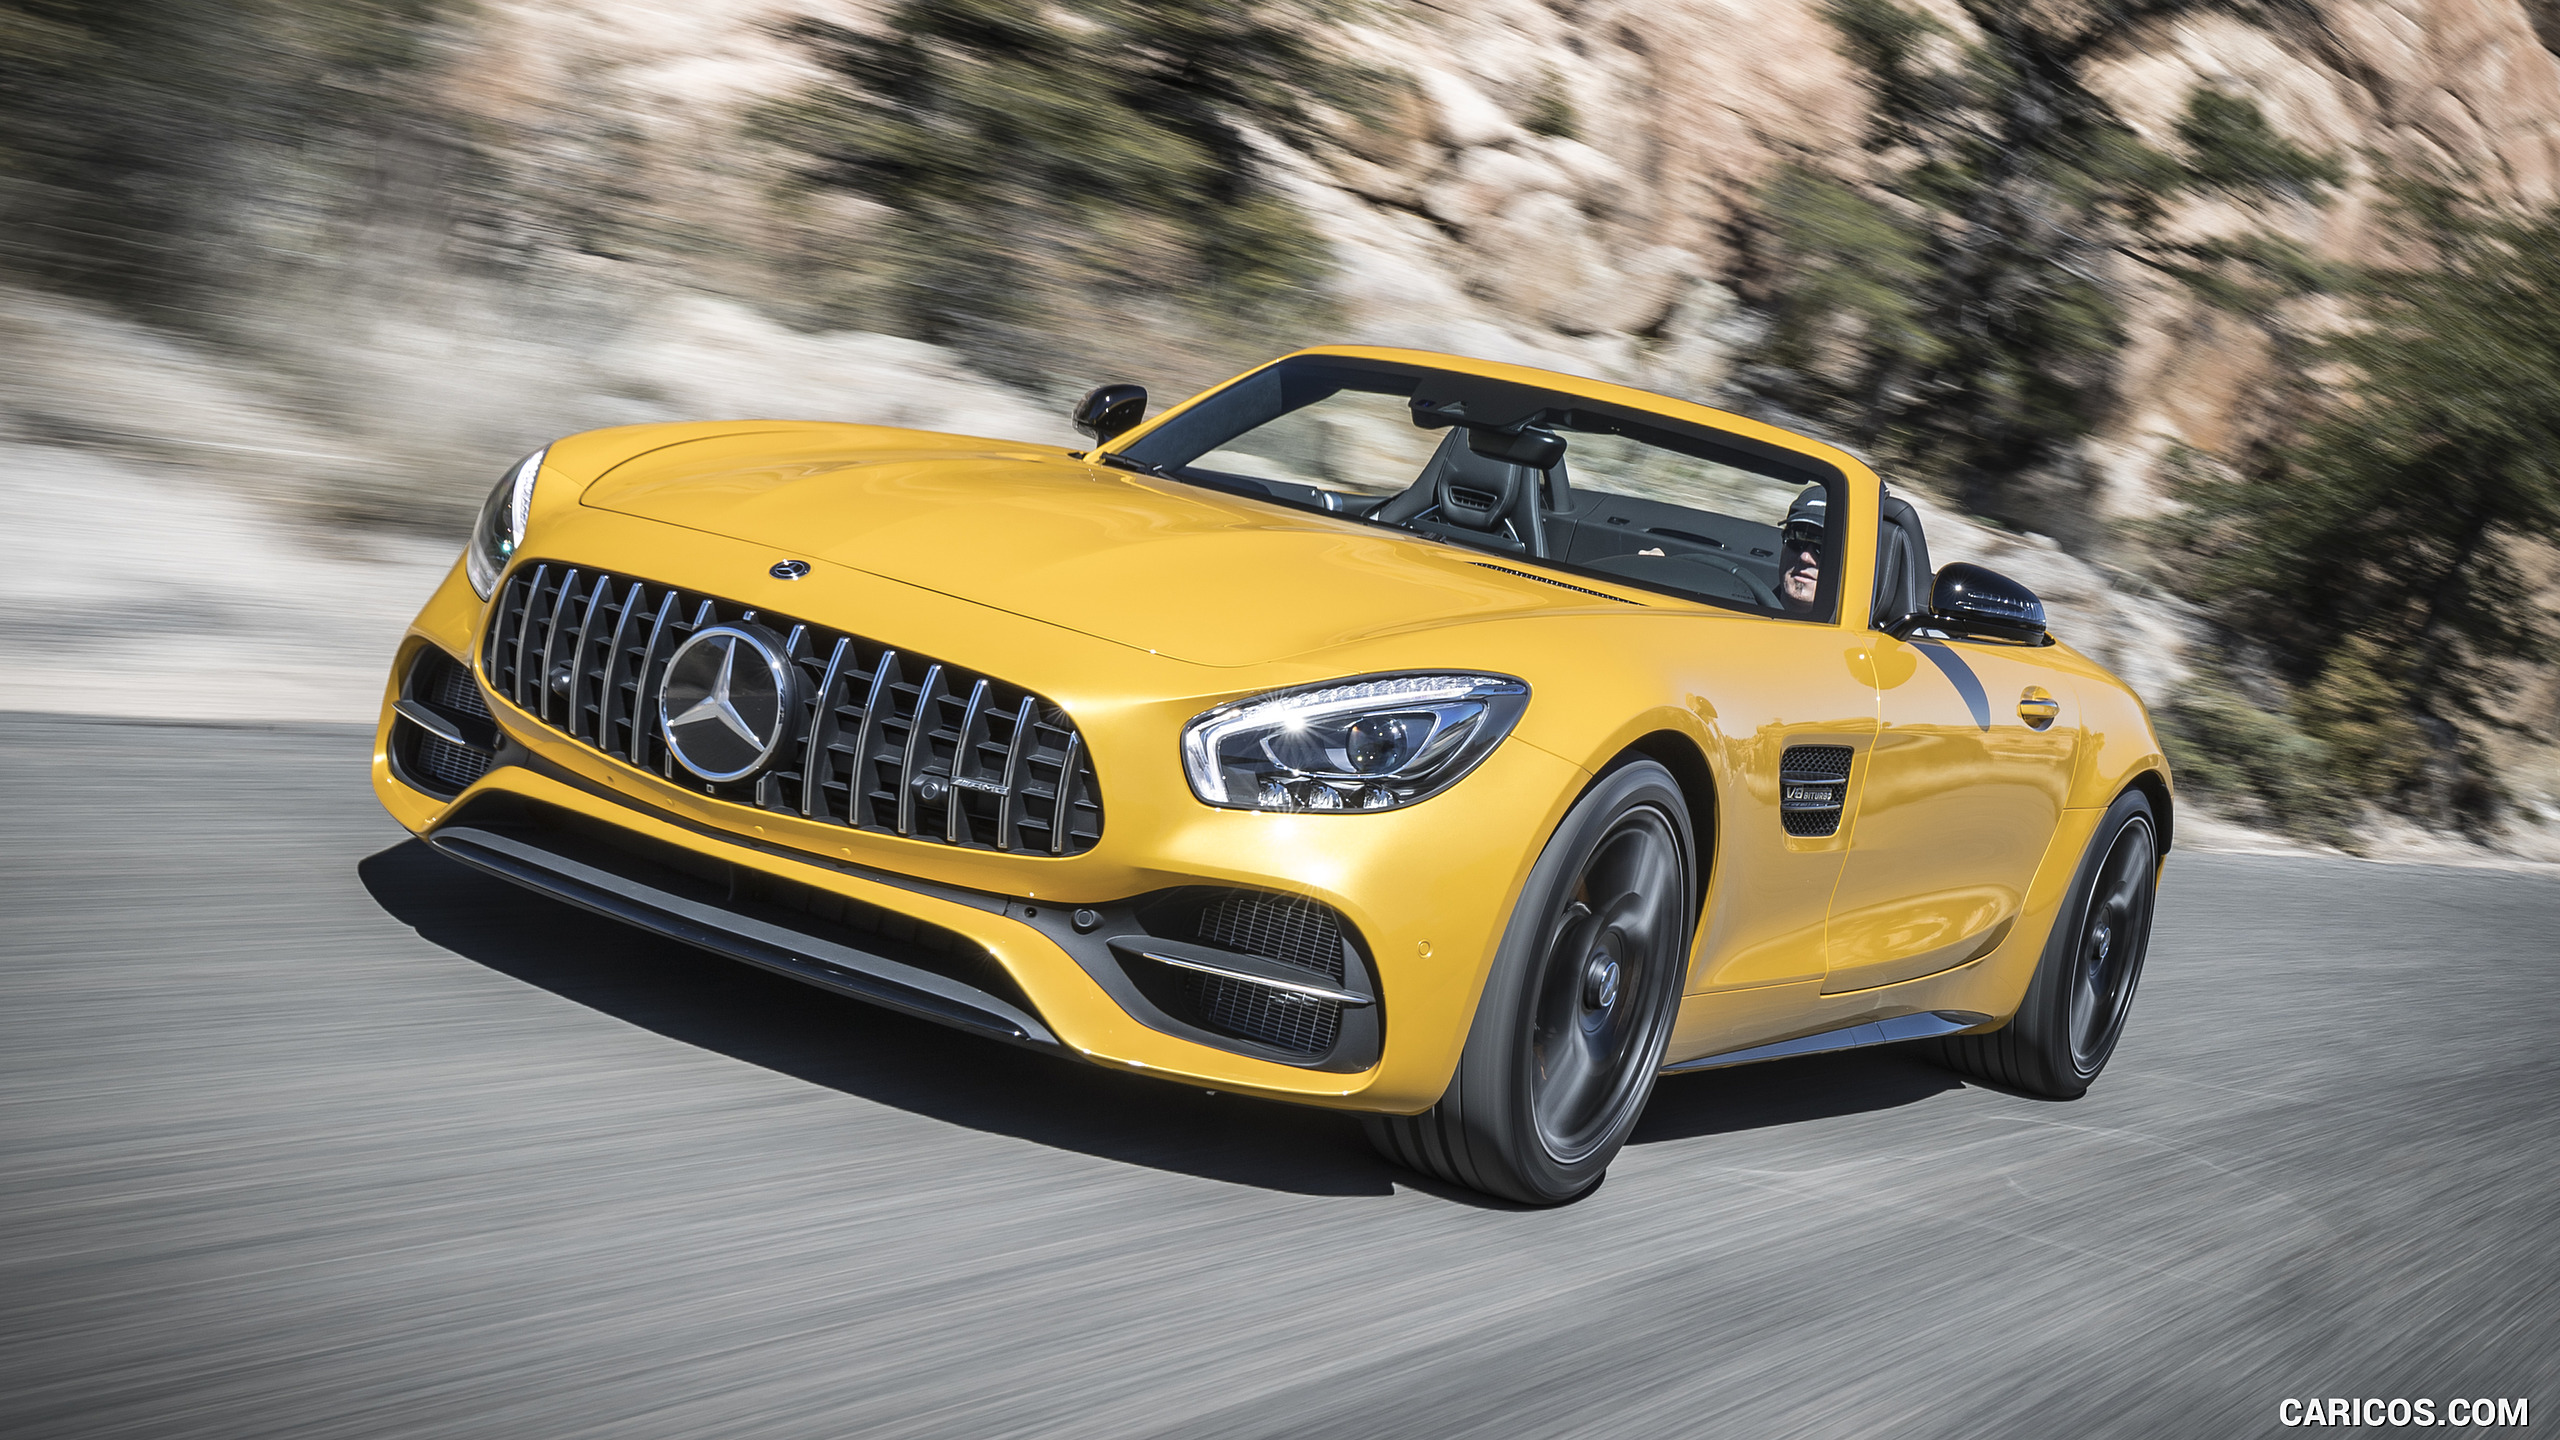 2018 Mercedes-AMG GT C Roadster - Front Three-Quarter, #196 of 350